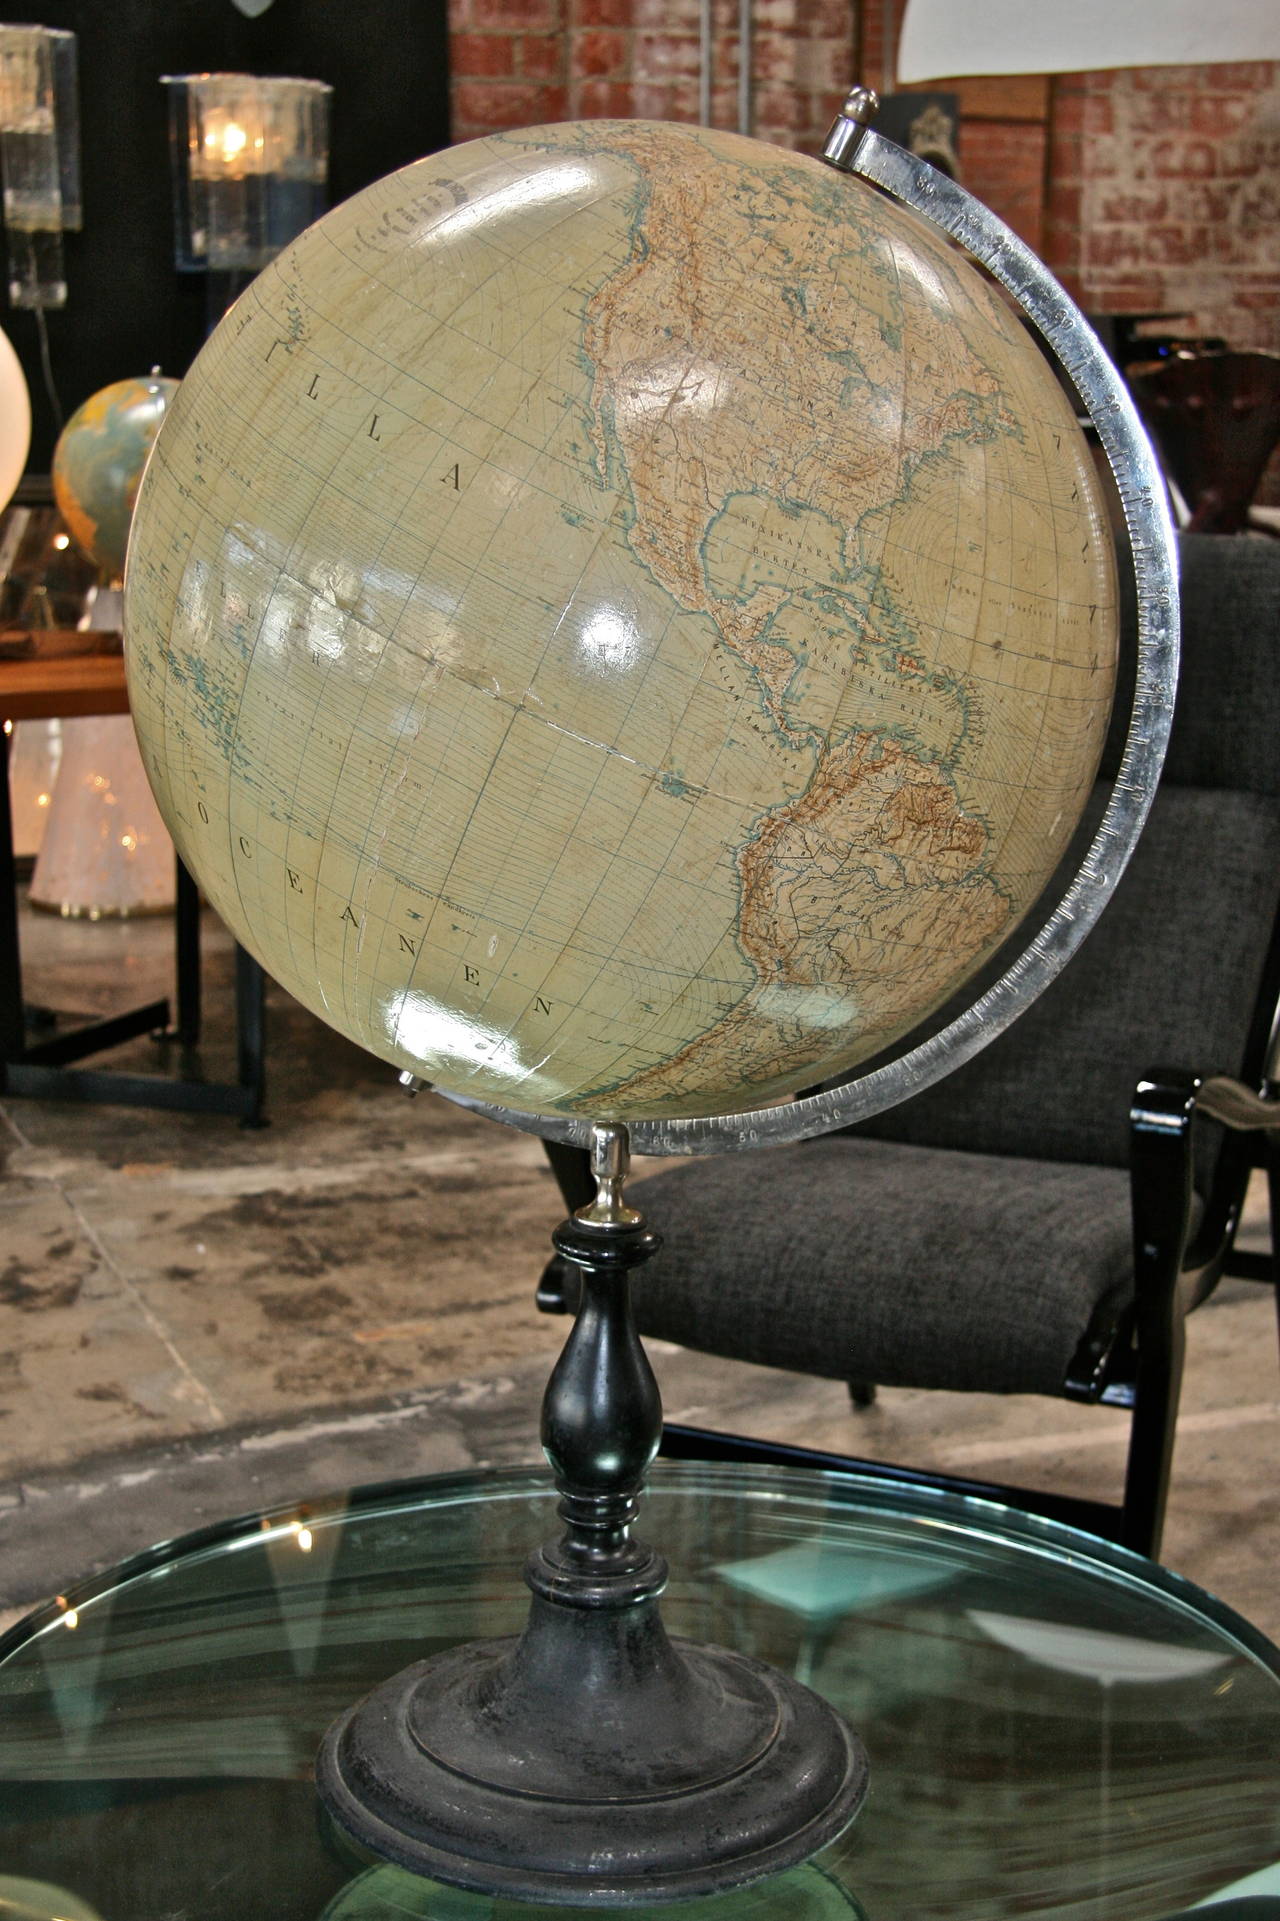 What a way to see the world on this super sized Swedish sphere...